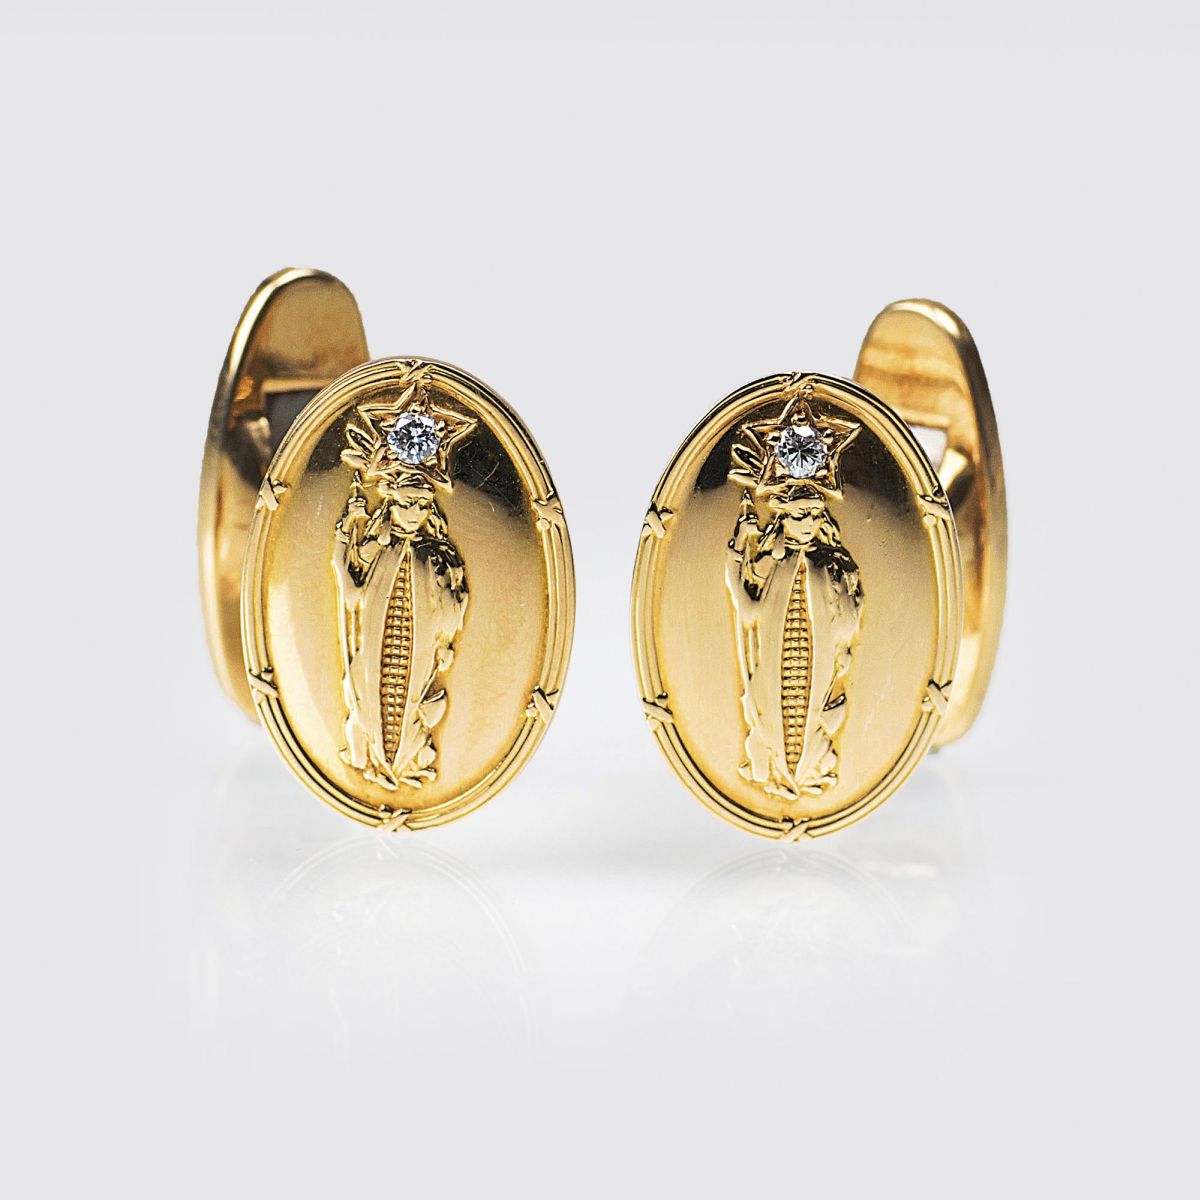 A Pair of Cufflinks with motives of a Native Indian